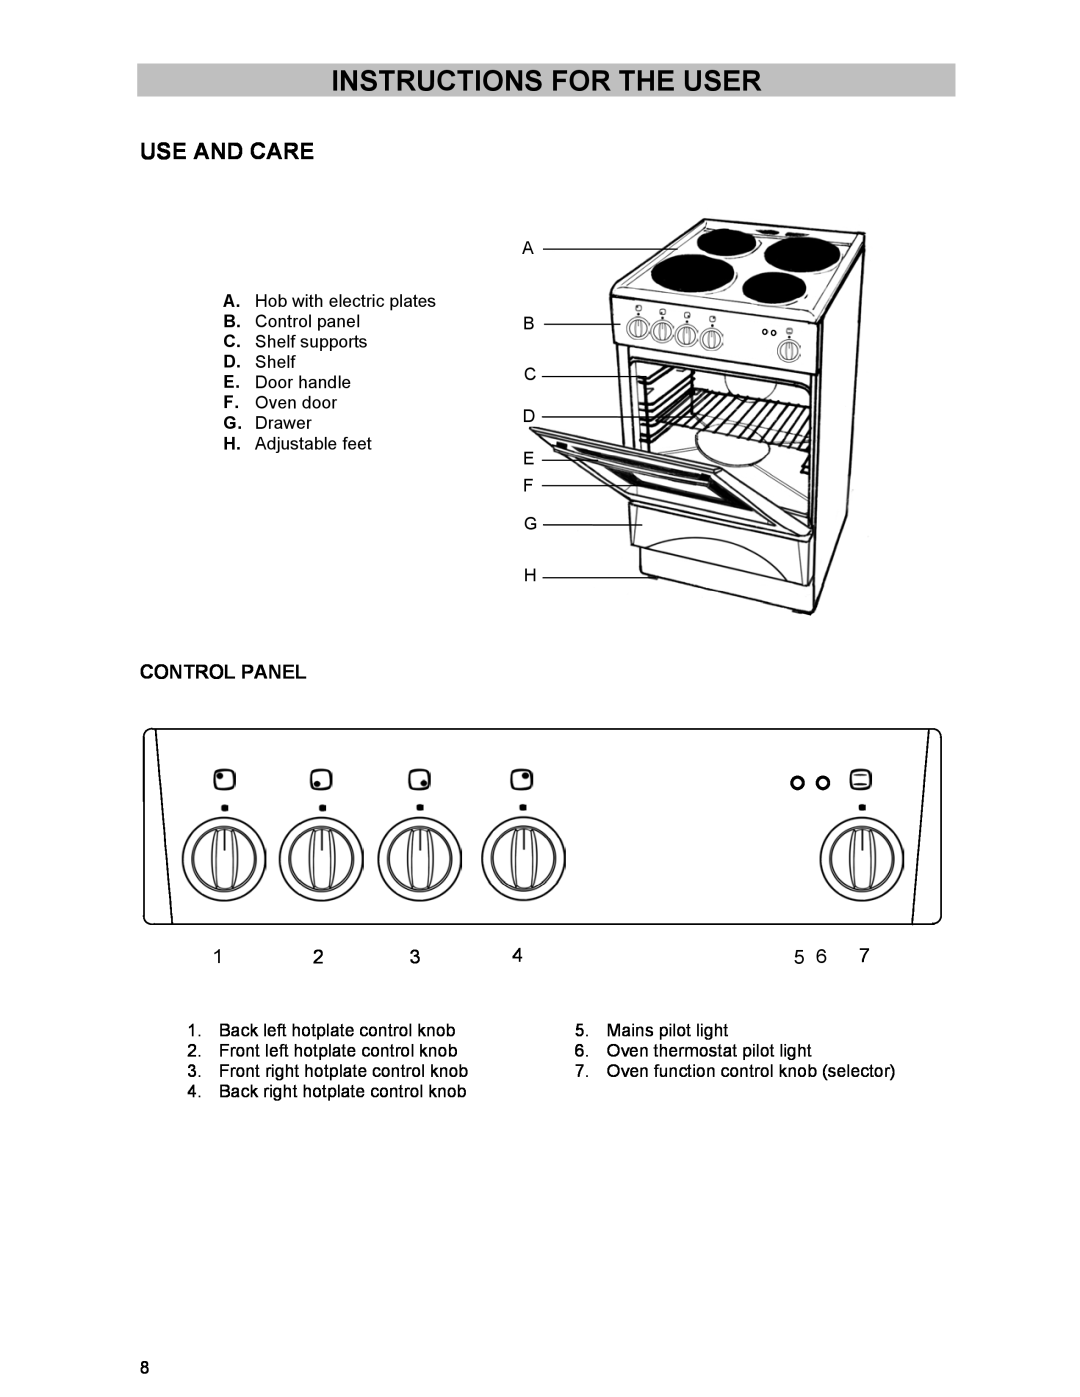 Electrolux DSO51EL manual Instructions For The User, Use And Care, Control Panel 